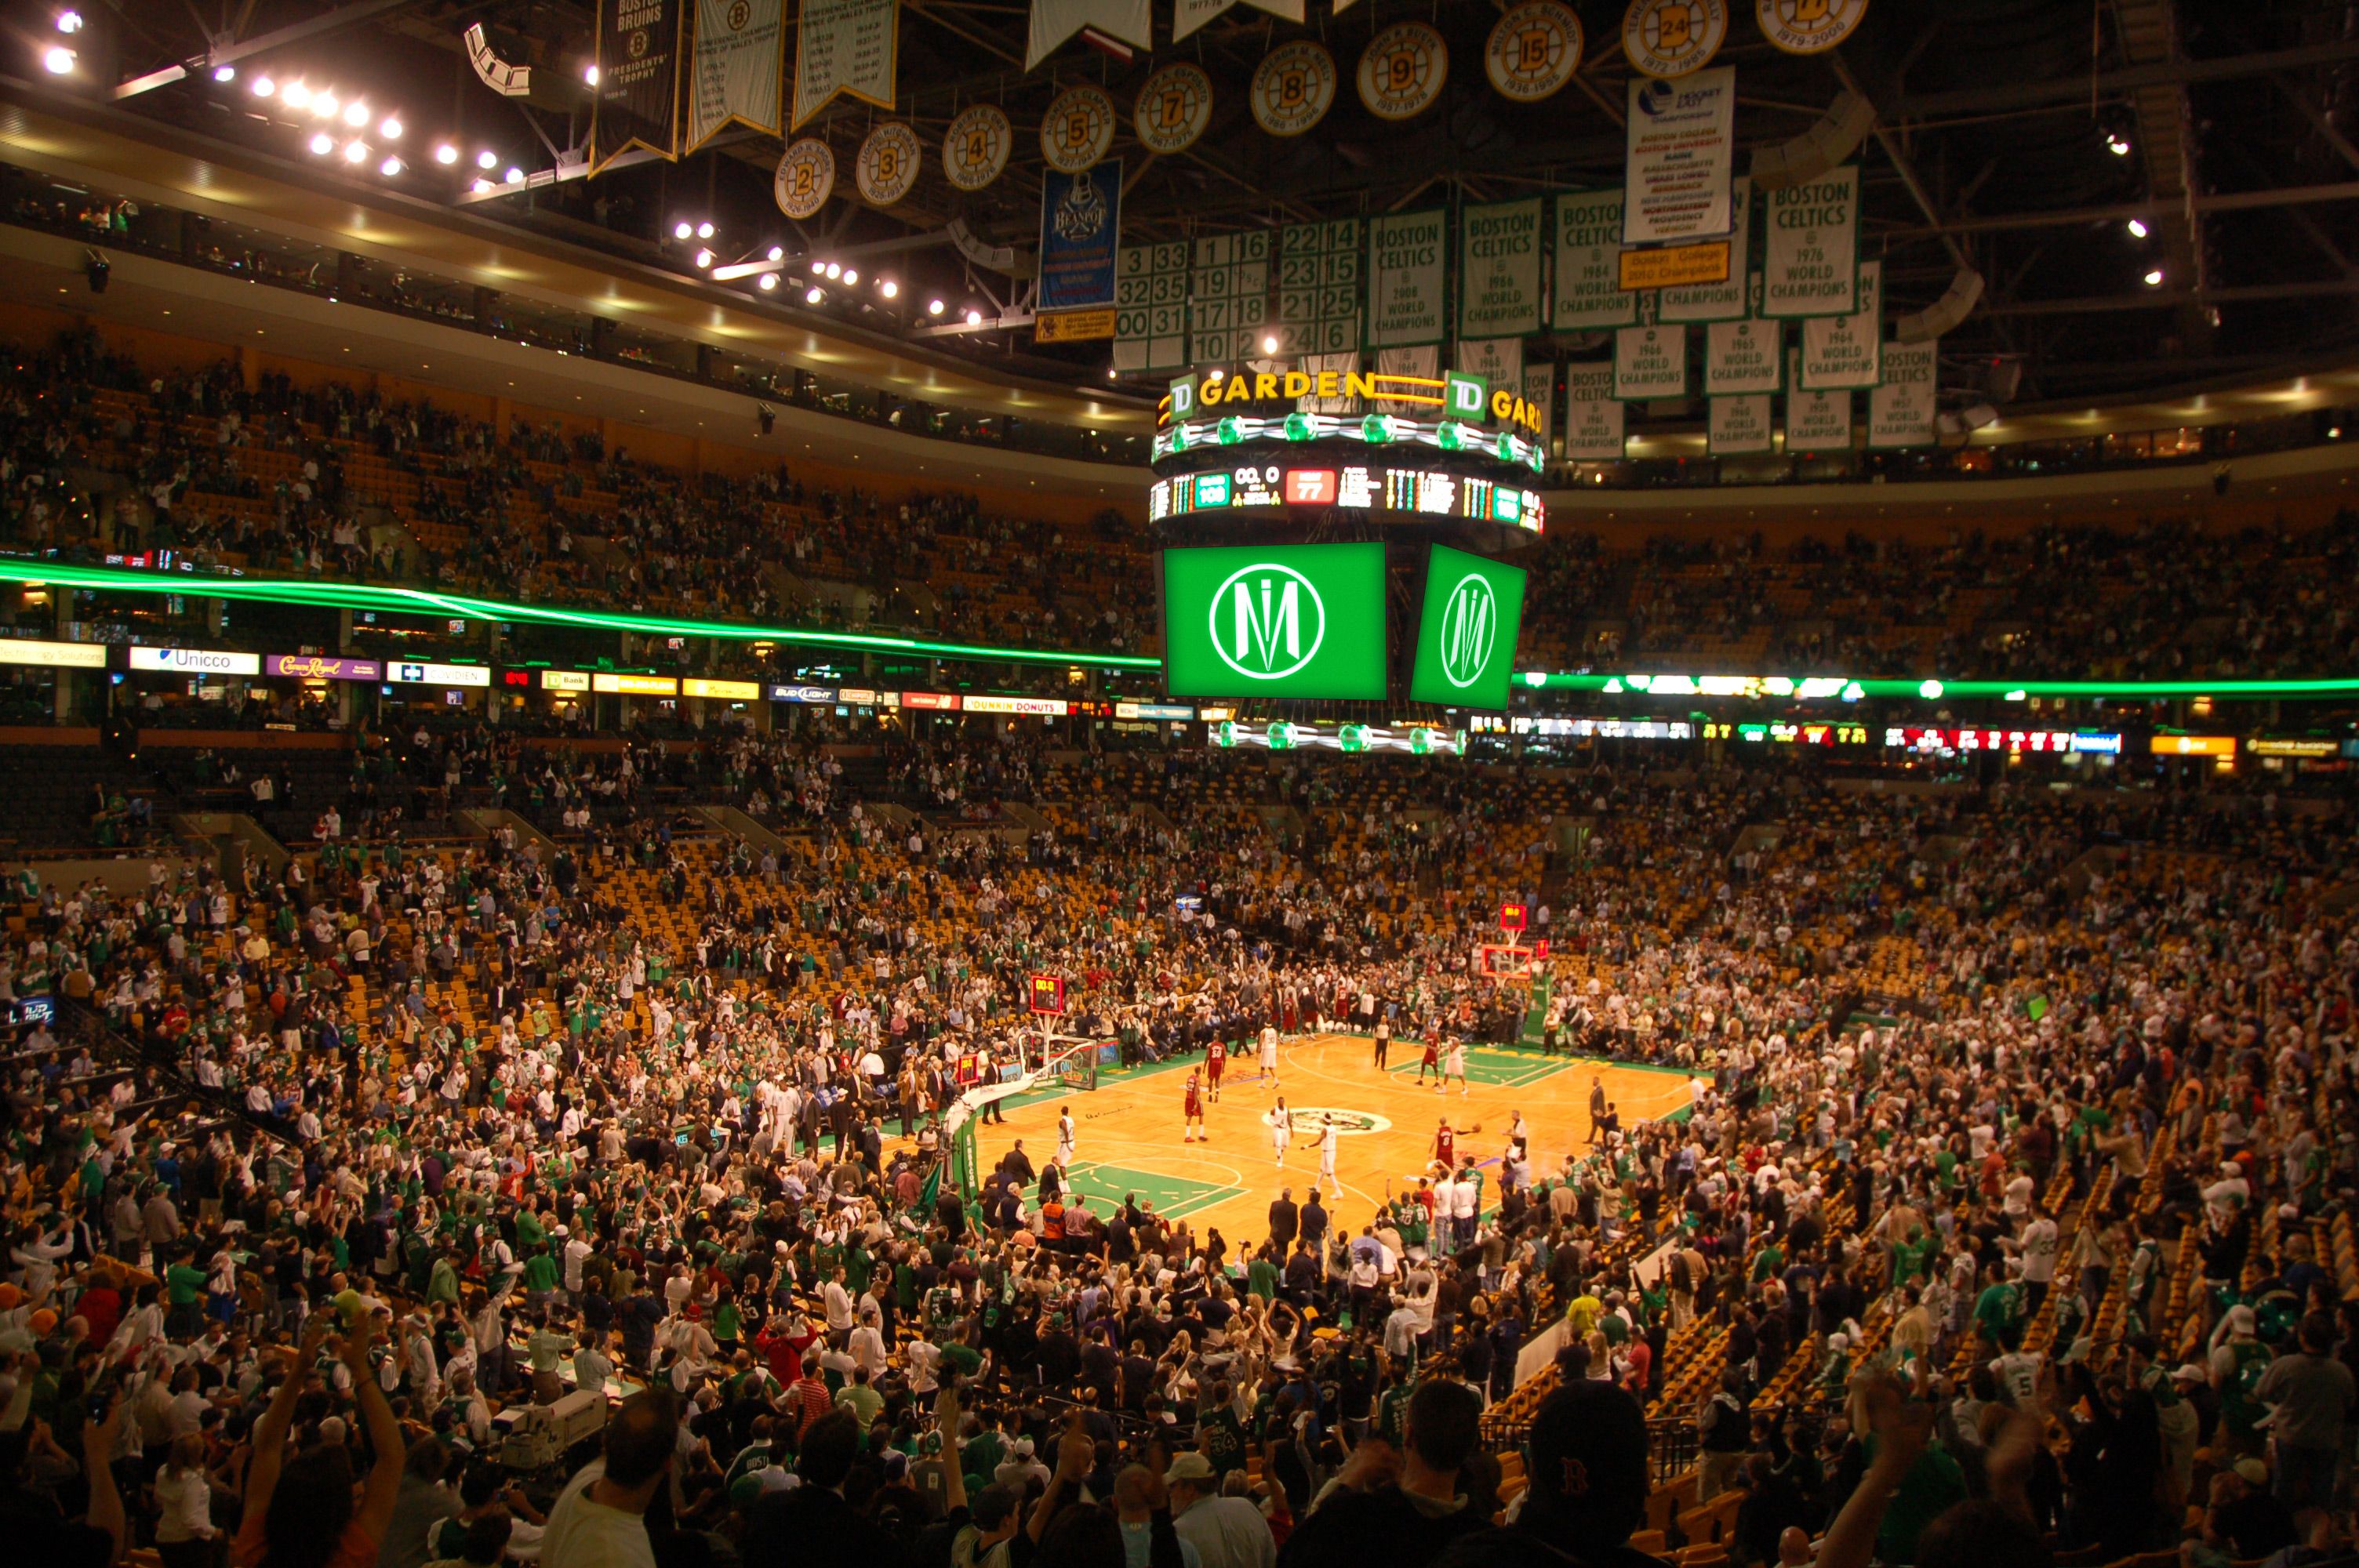 Td garden celtics hi-res stock photography and images - Alamy